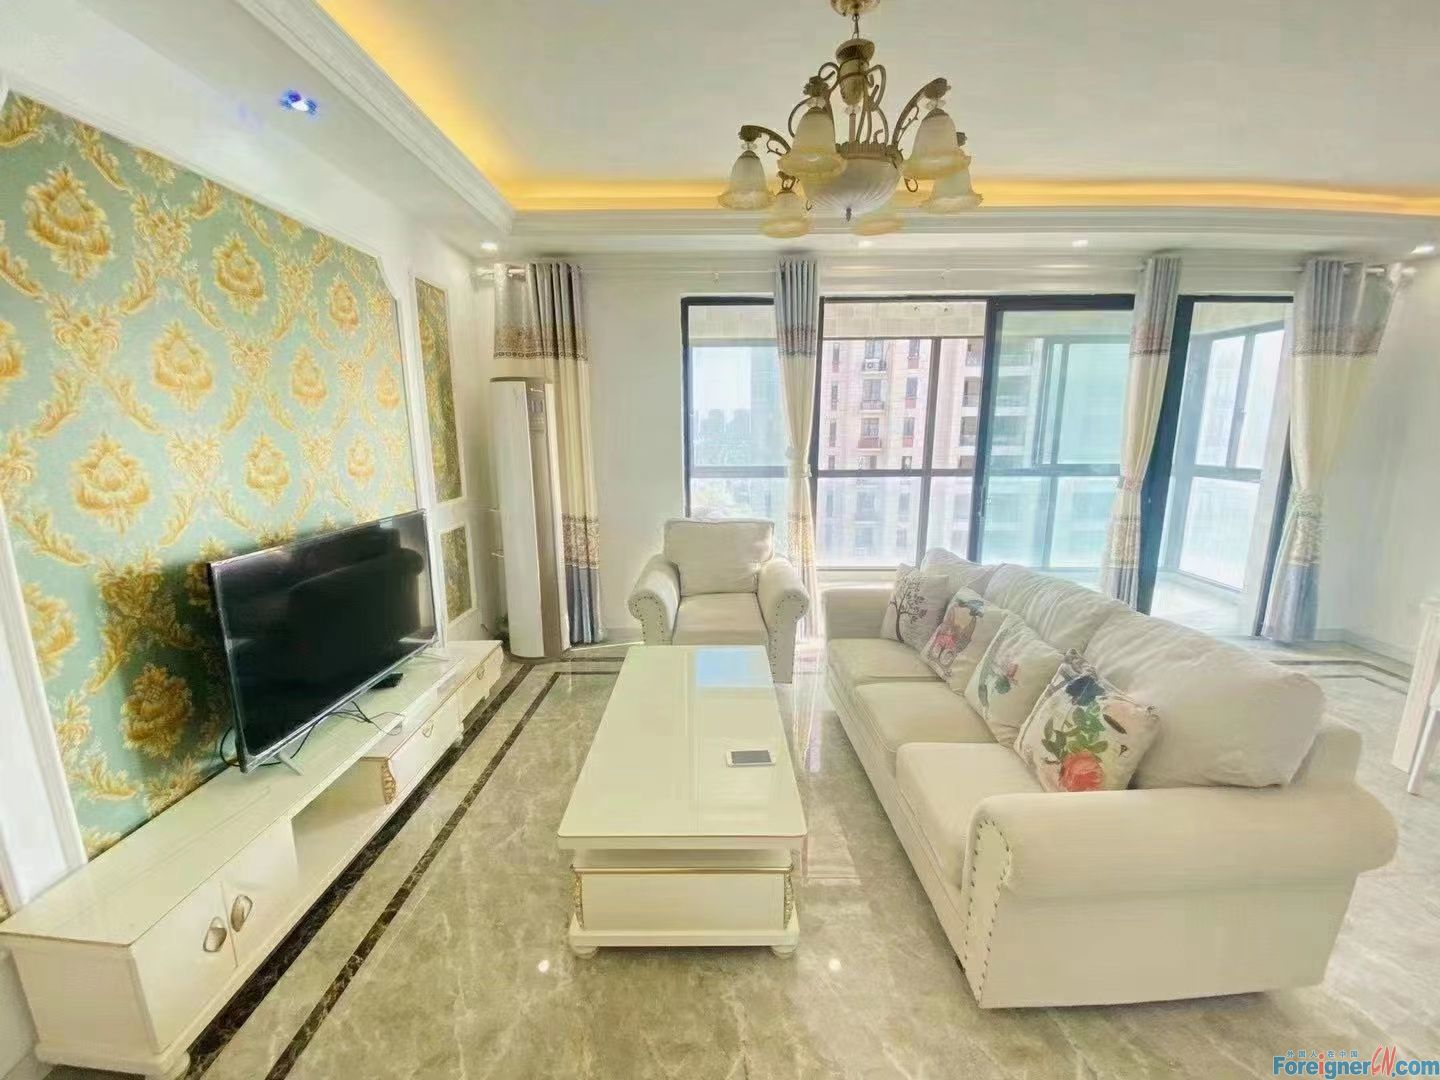 Terrific！！high value apartment rent for expats/3bedrooms and 2bathrooms/with a big Balcony/Nearby XieTang Town/Olympic /close to internatioanl schools SSIS, Dulwish, and OCAC /Dushu Lake